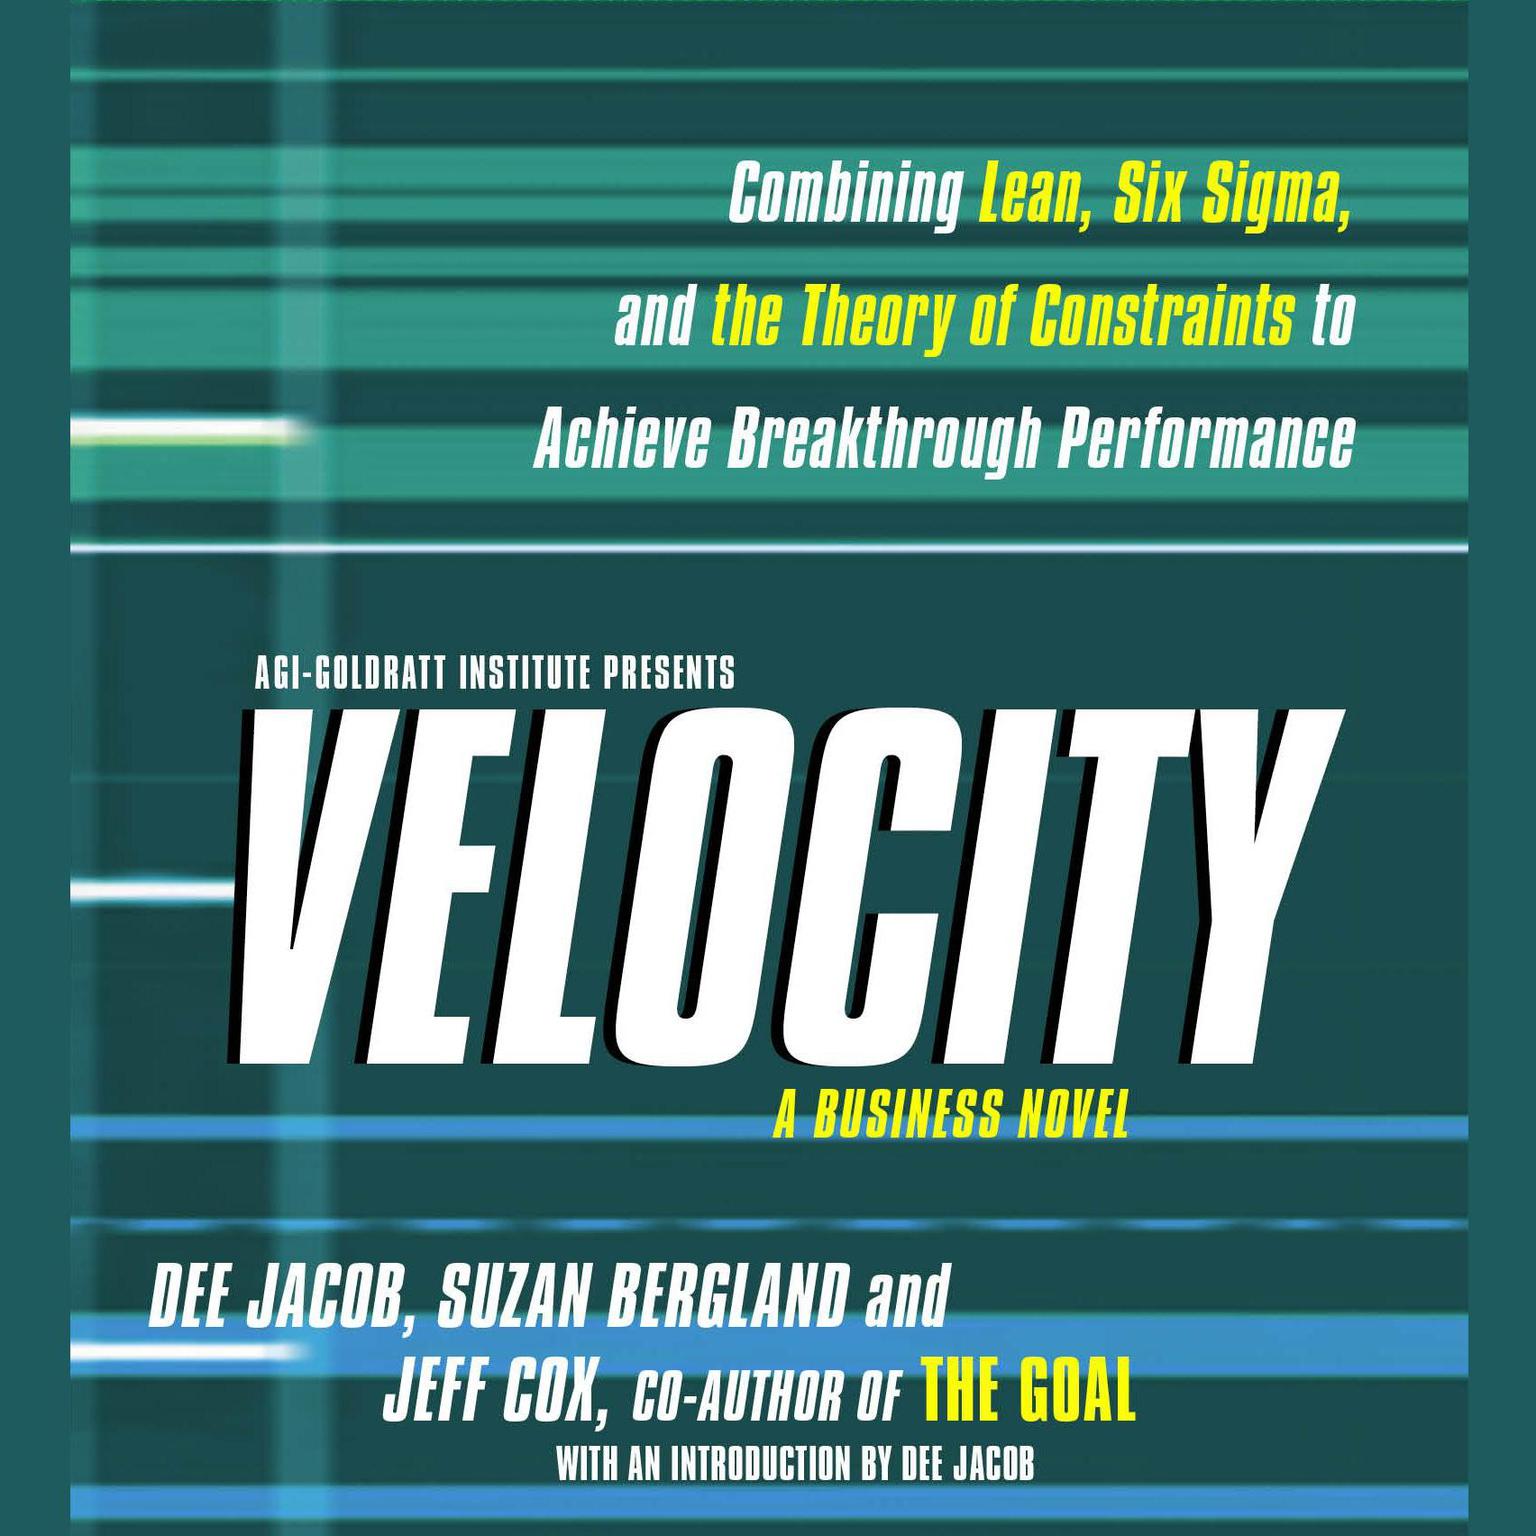 Velocity (Abridged): Combining Lean, Six Sigma and the Theory of Constraints to Achieve Breakthrough Performance - A Business Novel Audiobook, by Dee Jacob